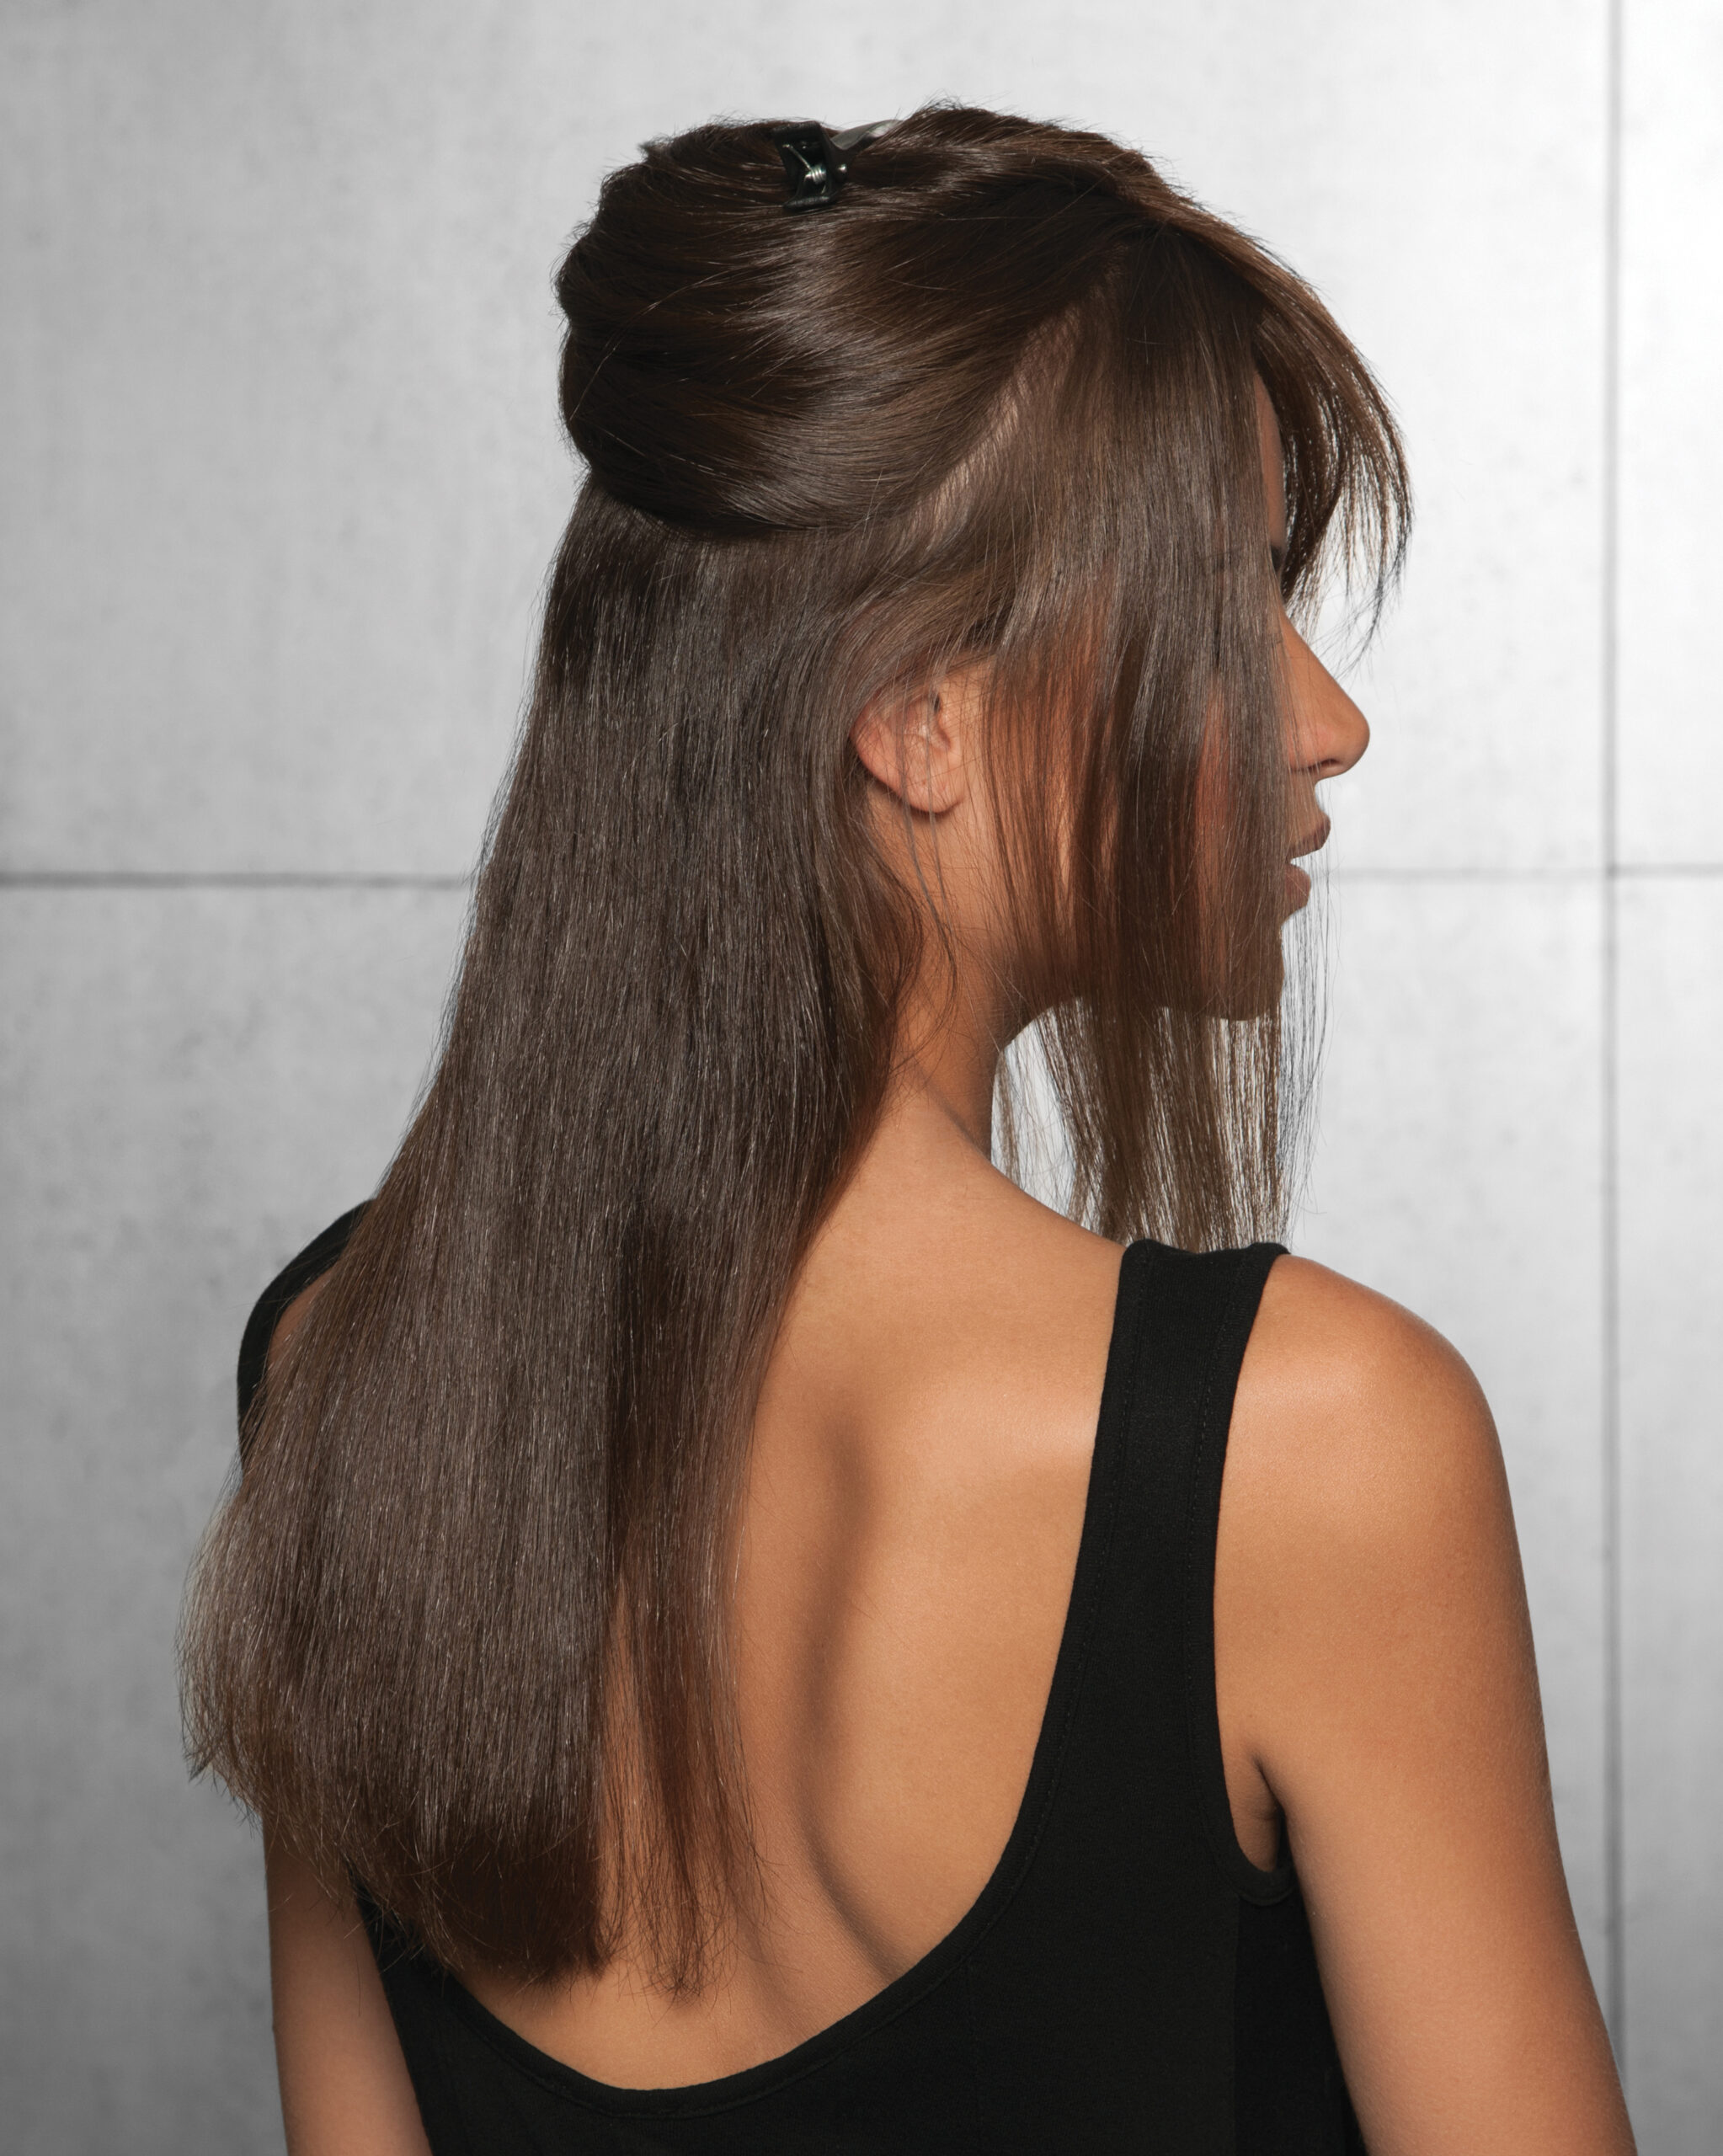 Invisible UV hair extensions #invisibleextensions #hair#extenstions#uv, Extensions  Hair